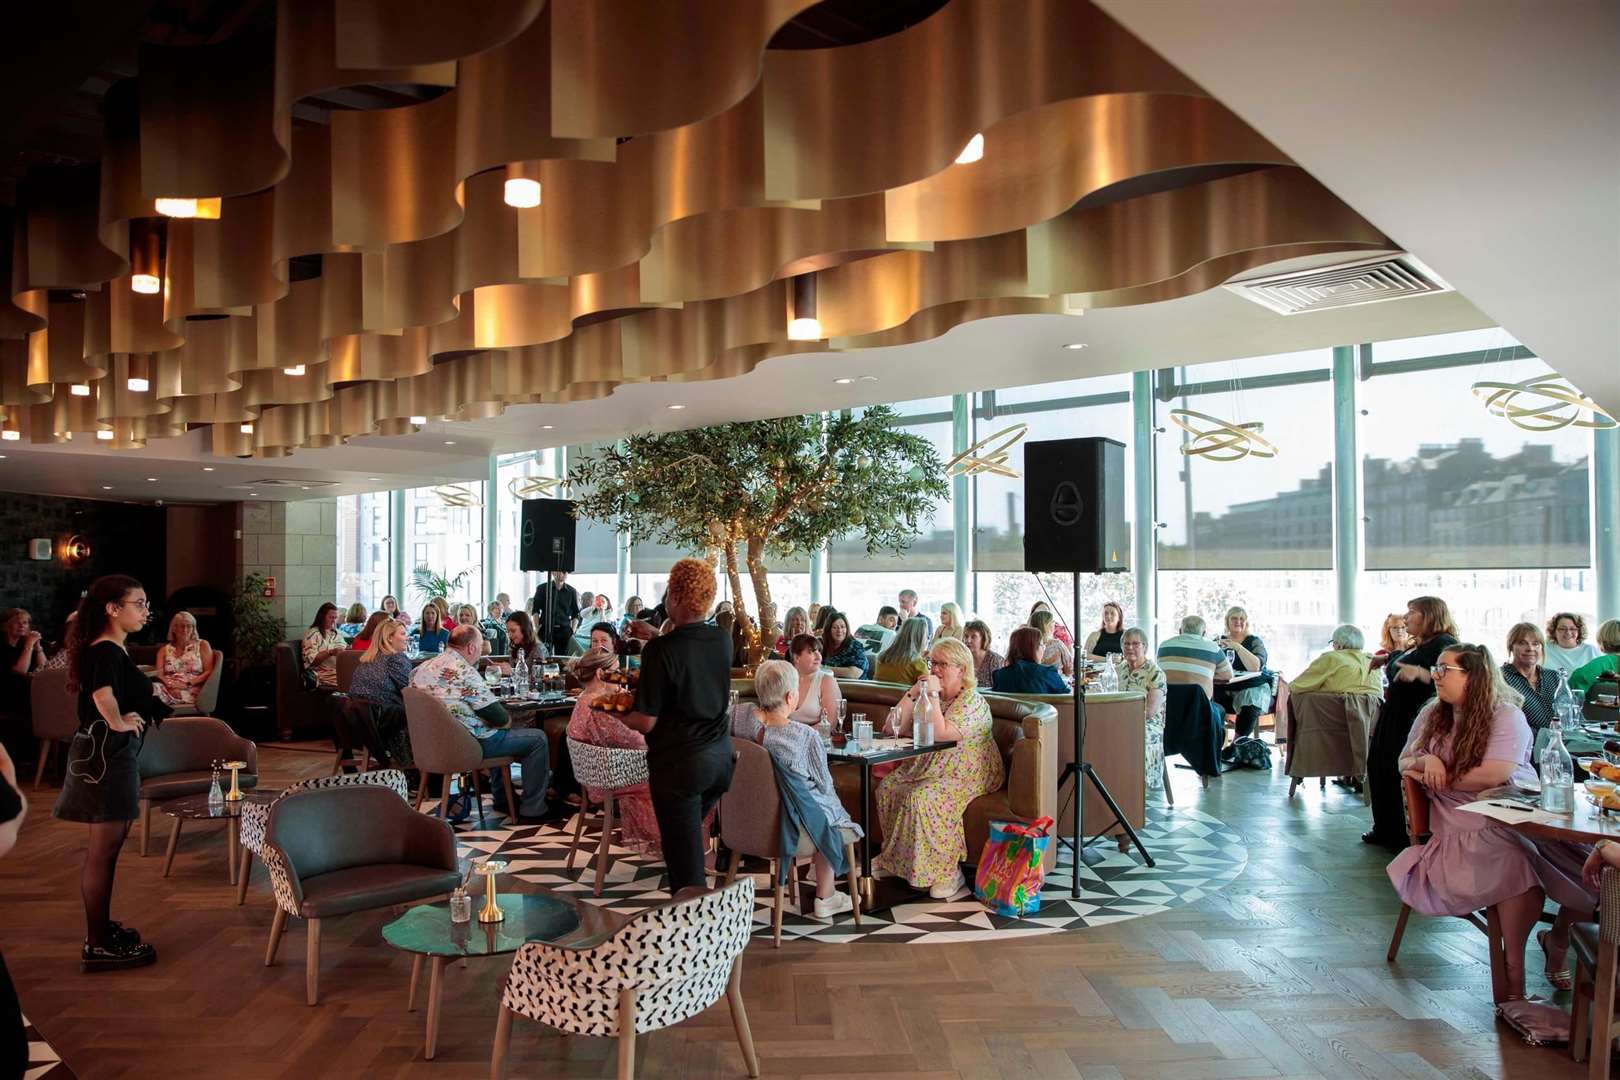 The Musical Afternoon Tea serves up a delicious selection of sandwiches, savoury treats and assorted cakes alongside a generous helping of entertainment.